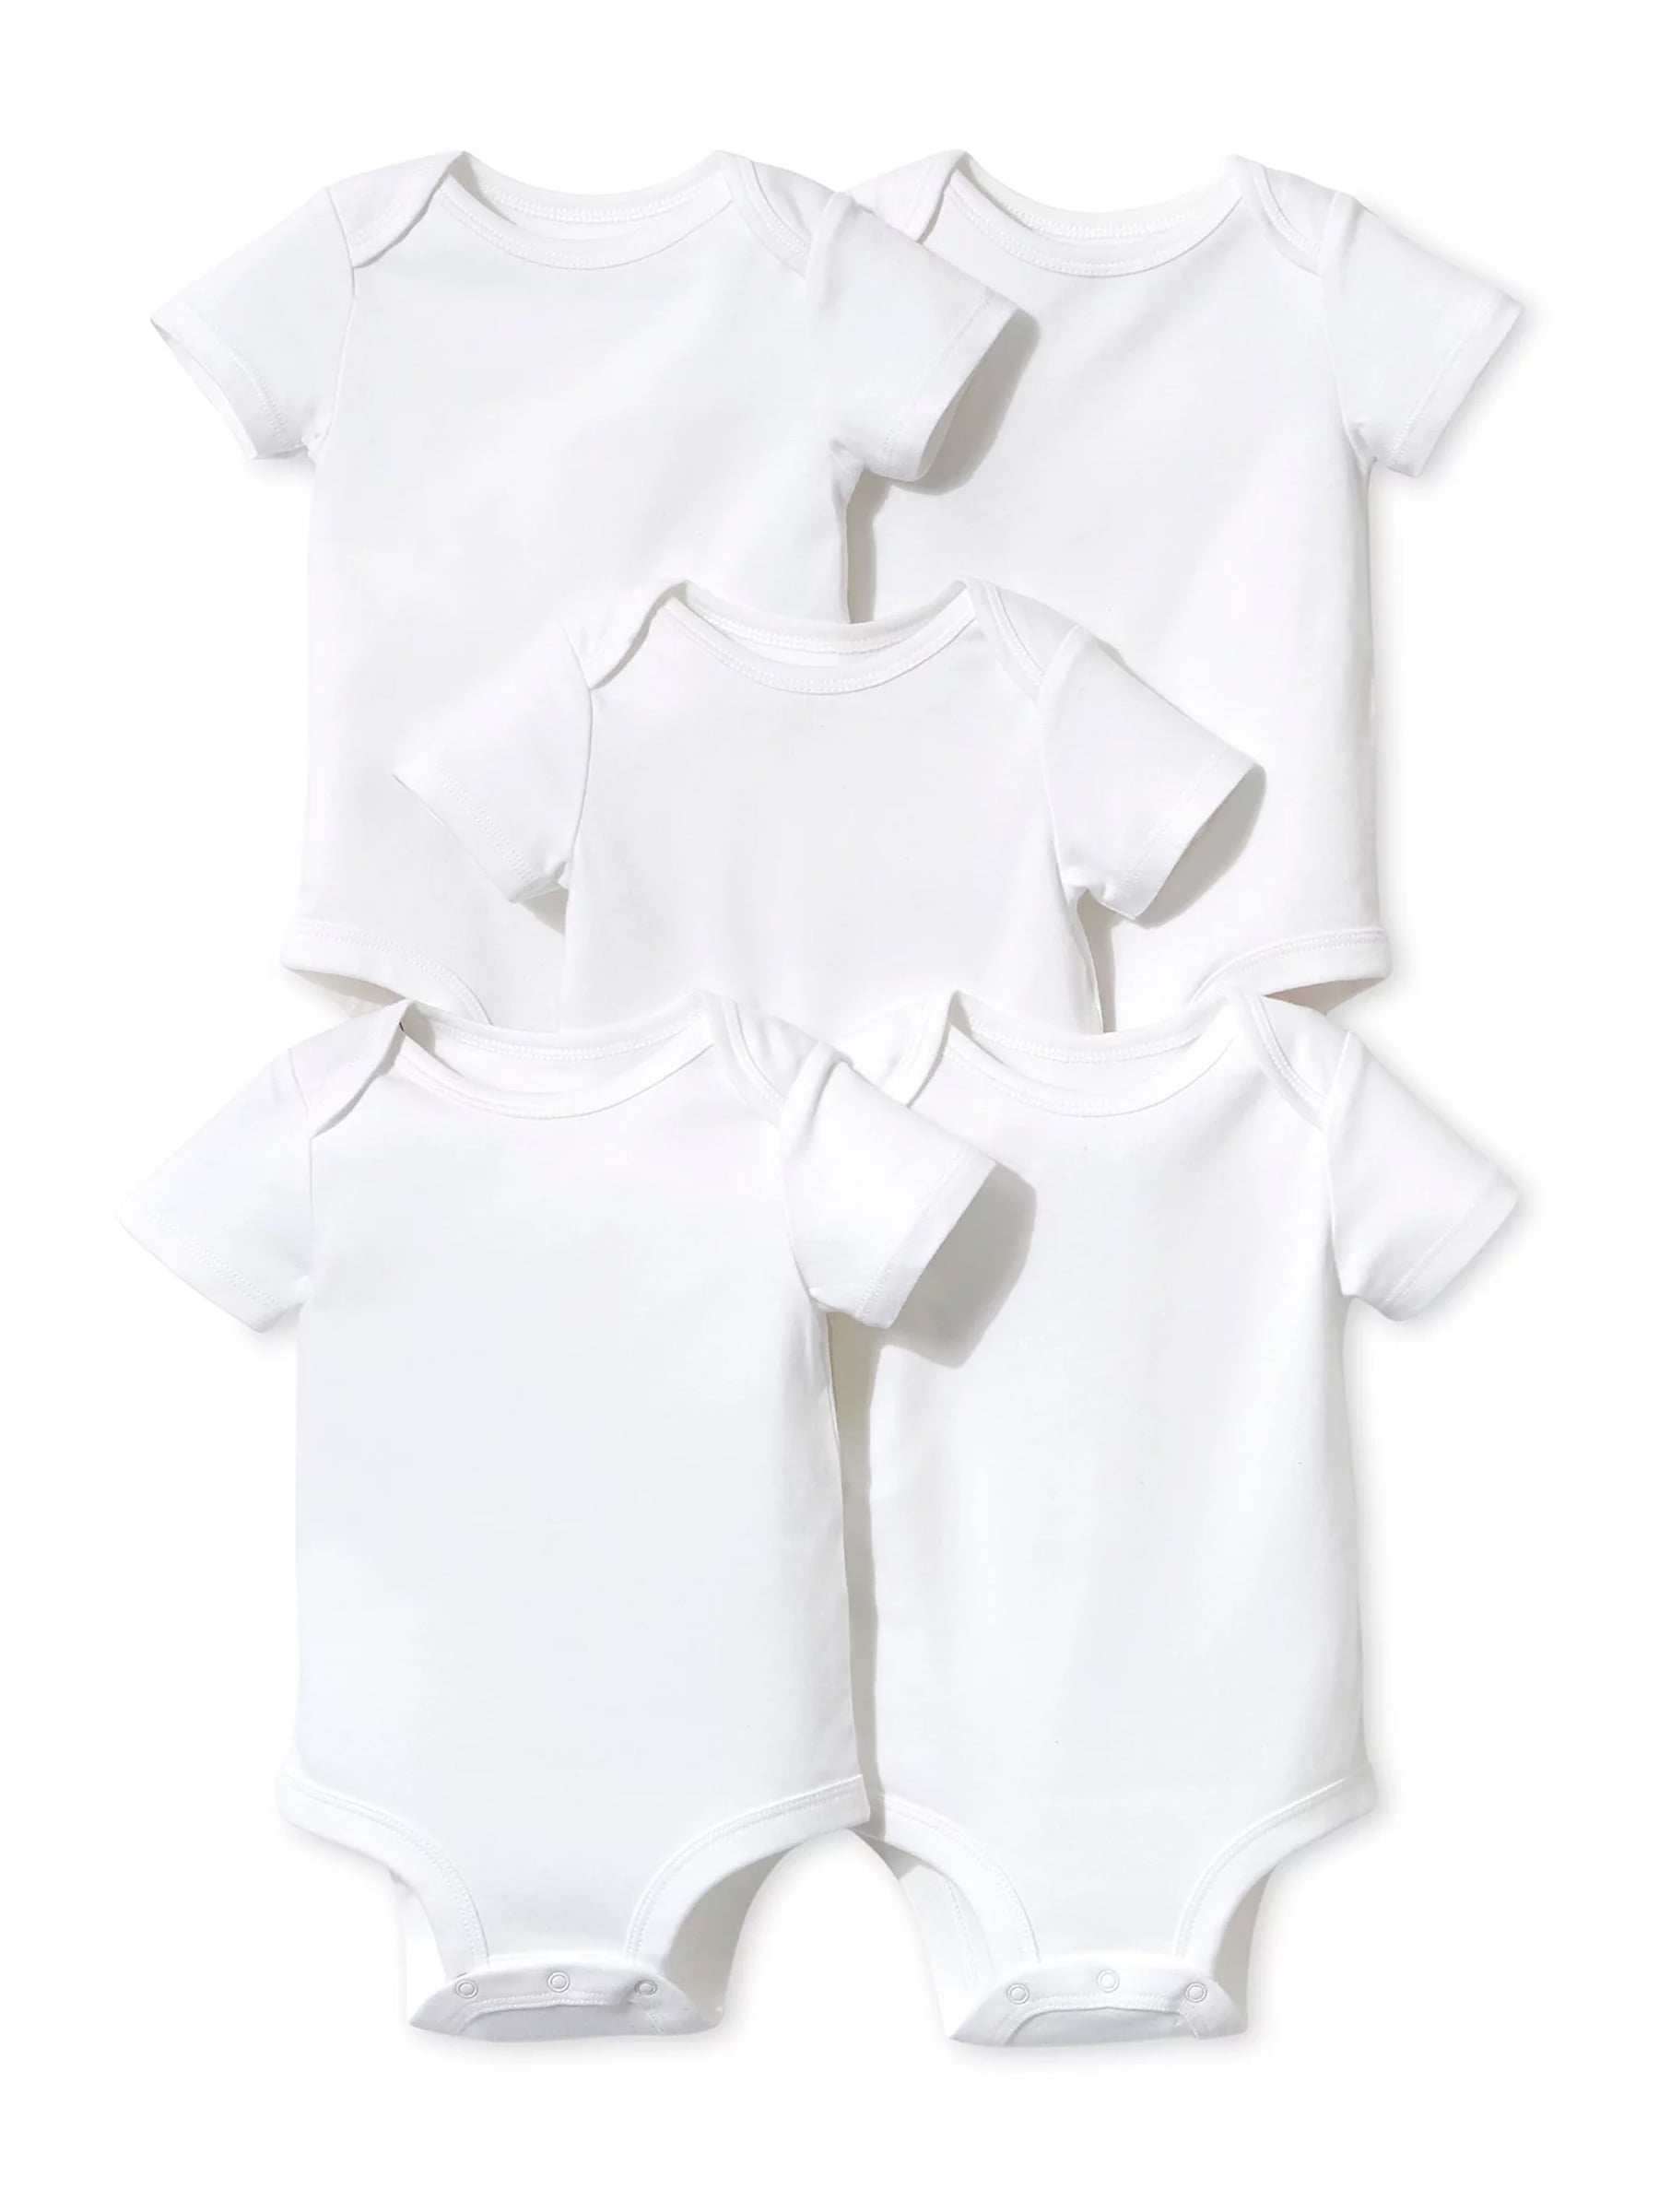 Little Star Super Combed Natural Cotton Baby Unisex Short Sleeve